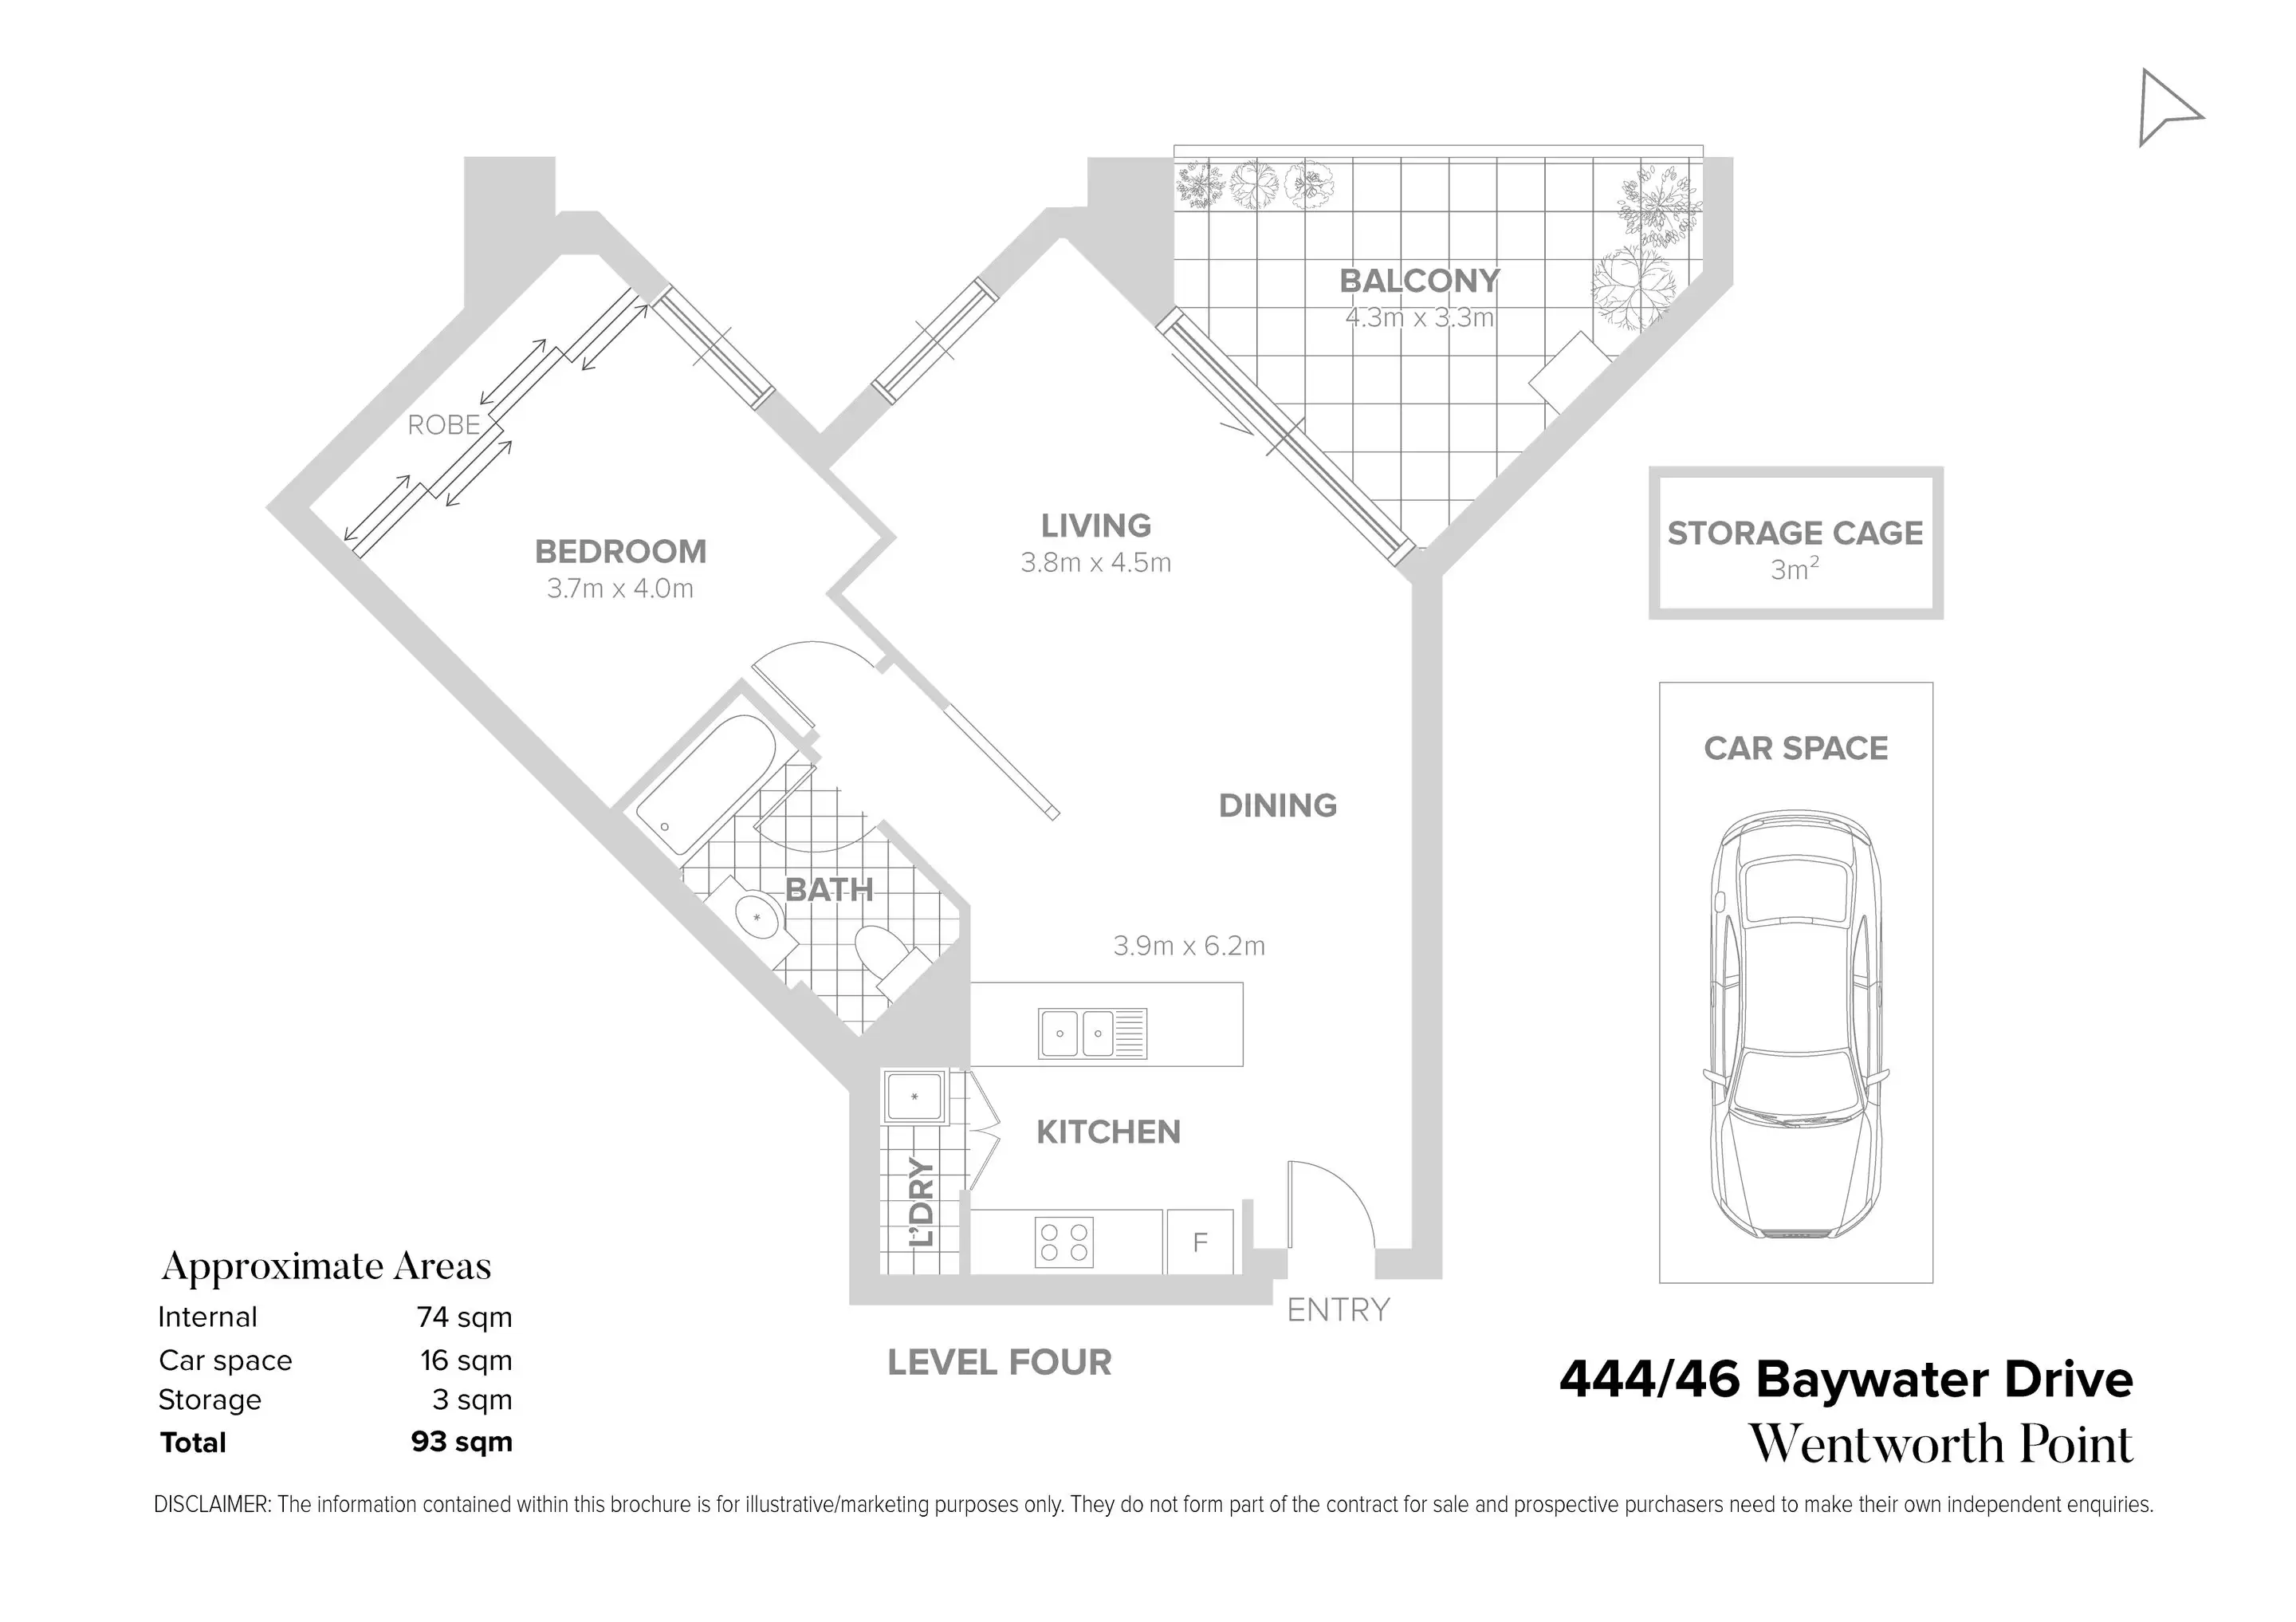 444/46 Baywater Drive, Wentworth Point Sold by Chidiac Realty - floorplan